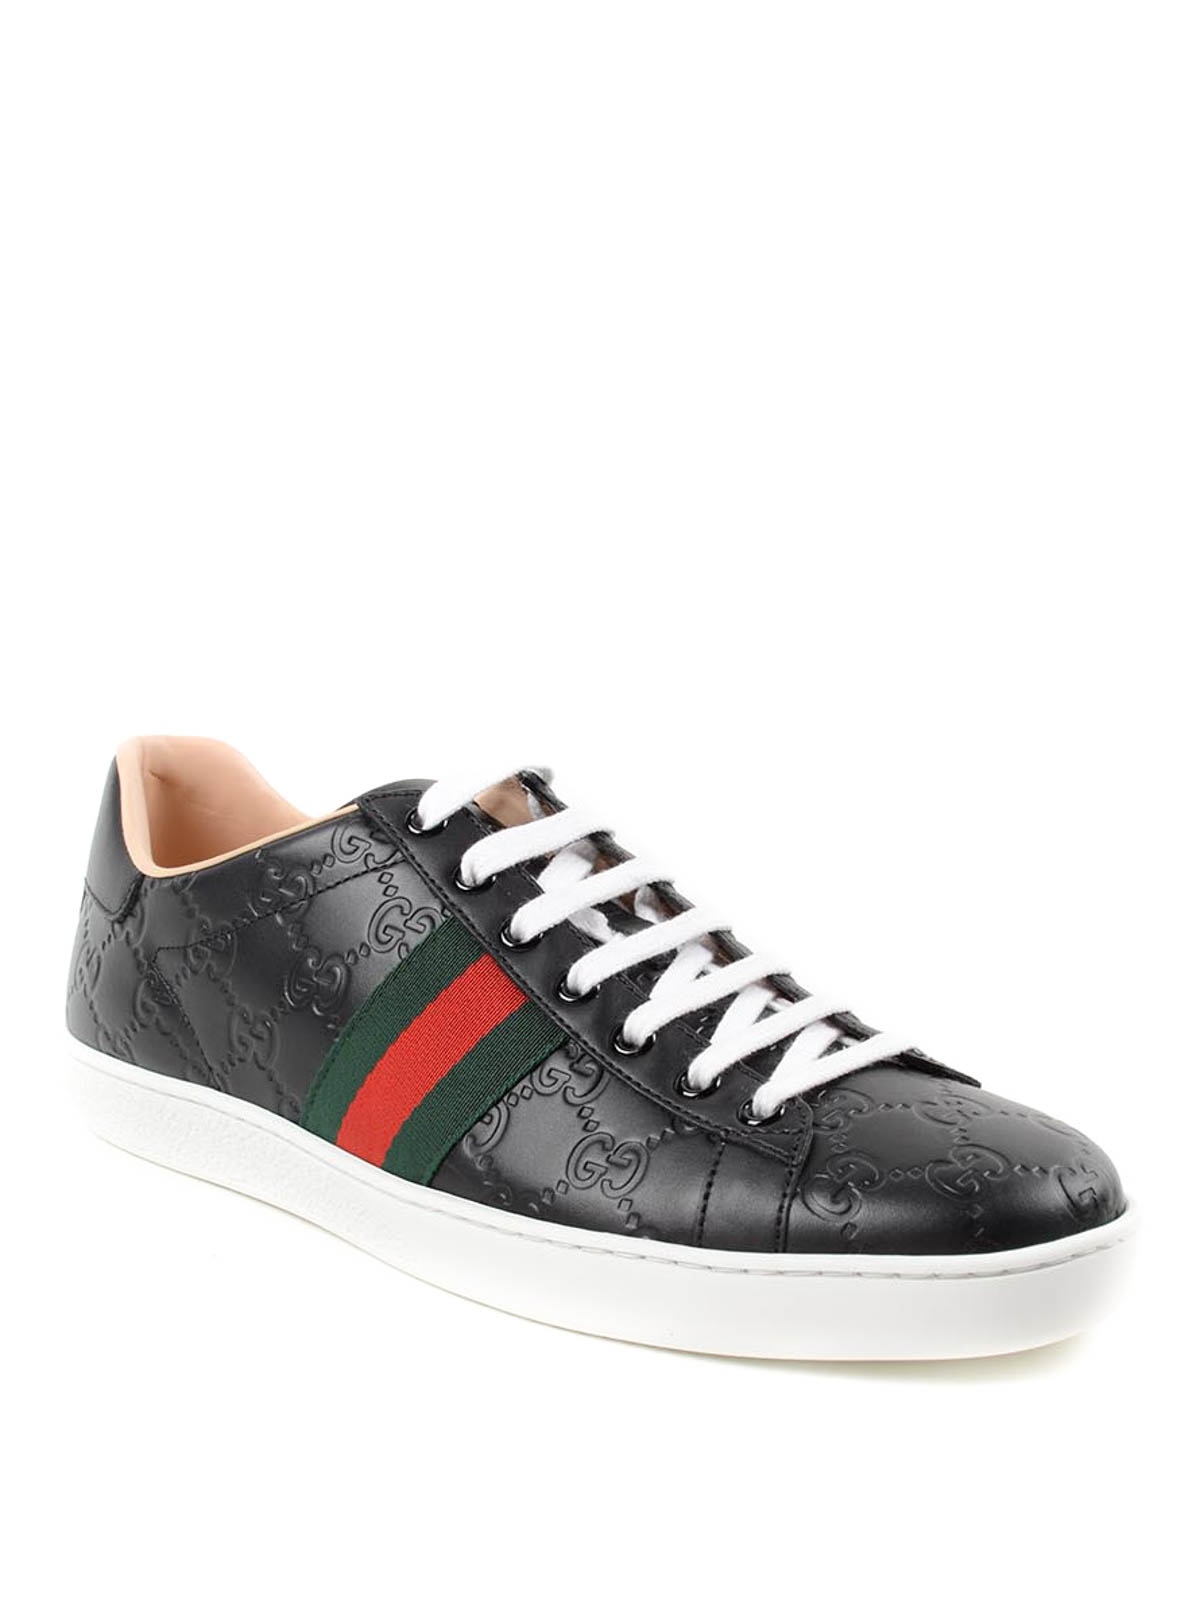 GG leather sneakers by Gucci - trainers | Shop online at 0